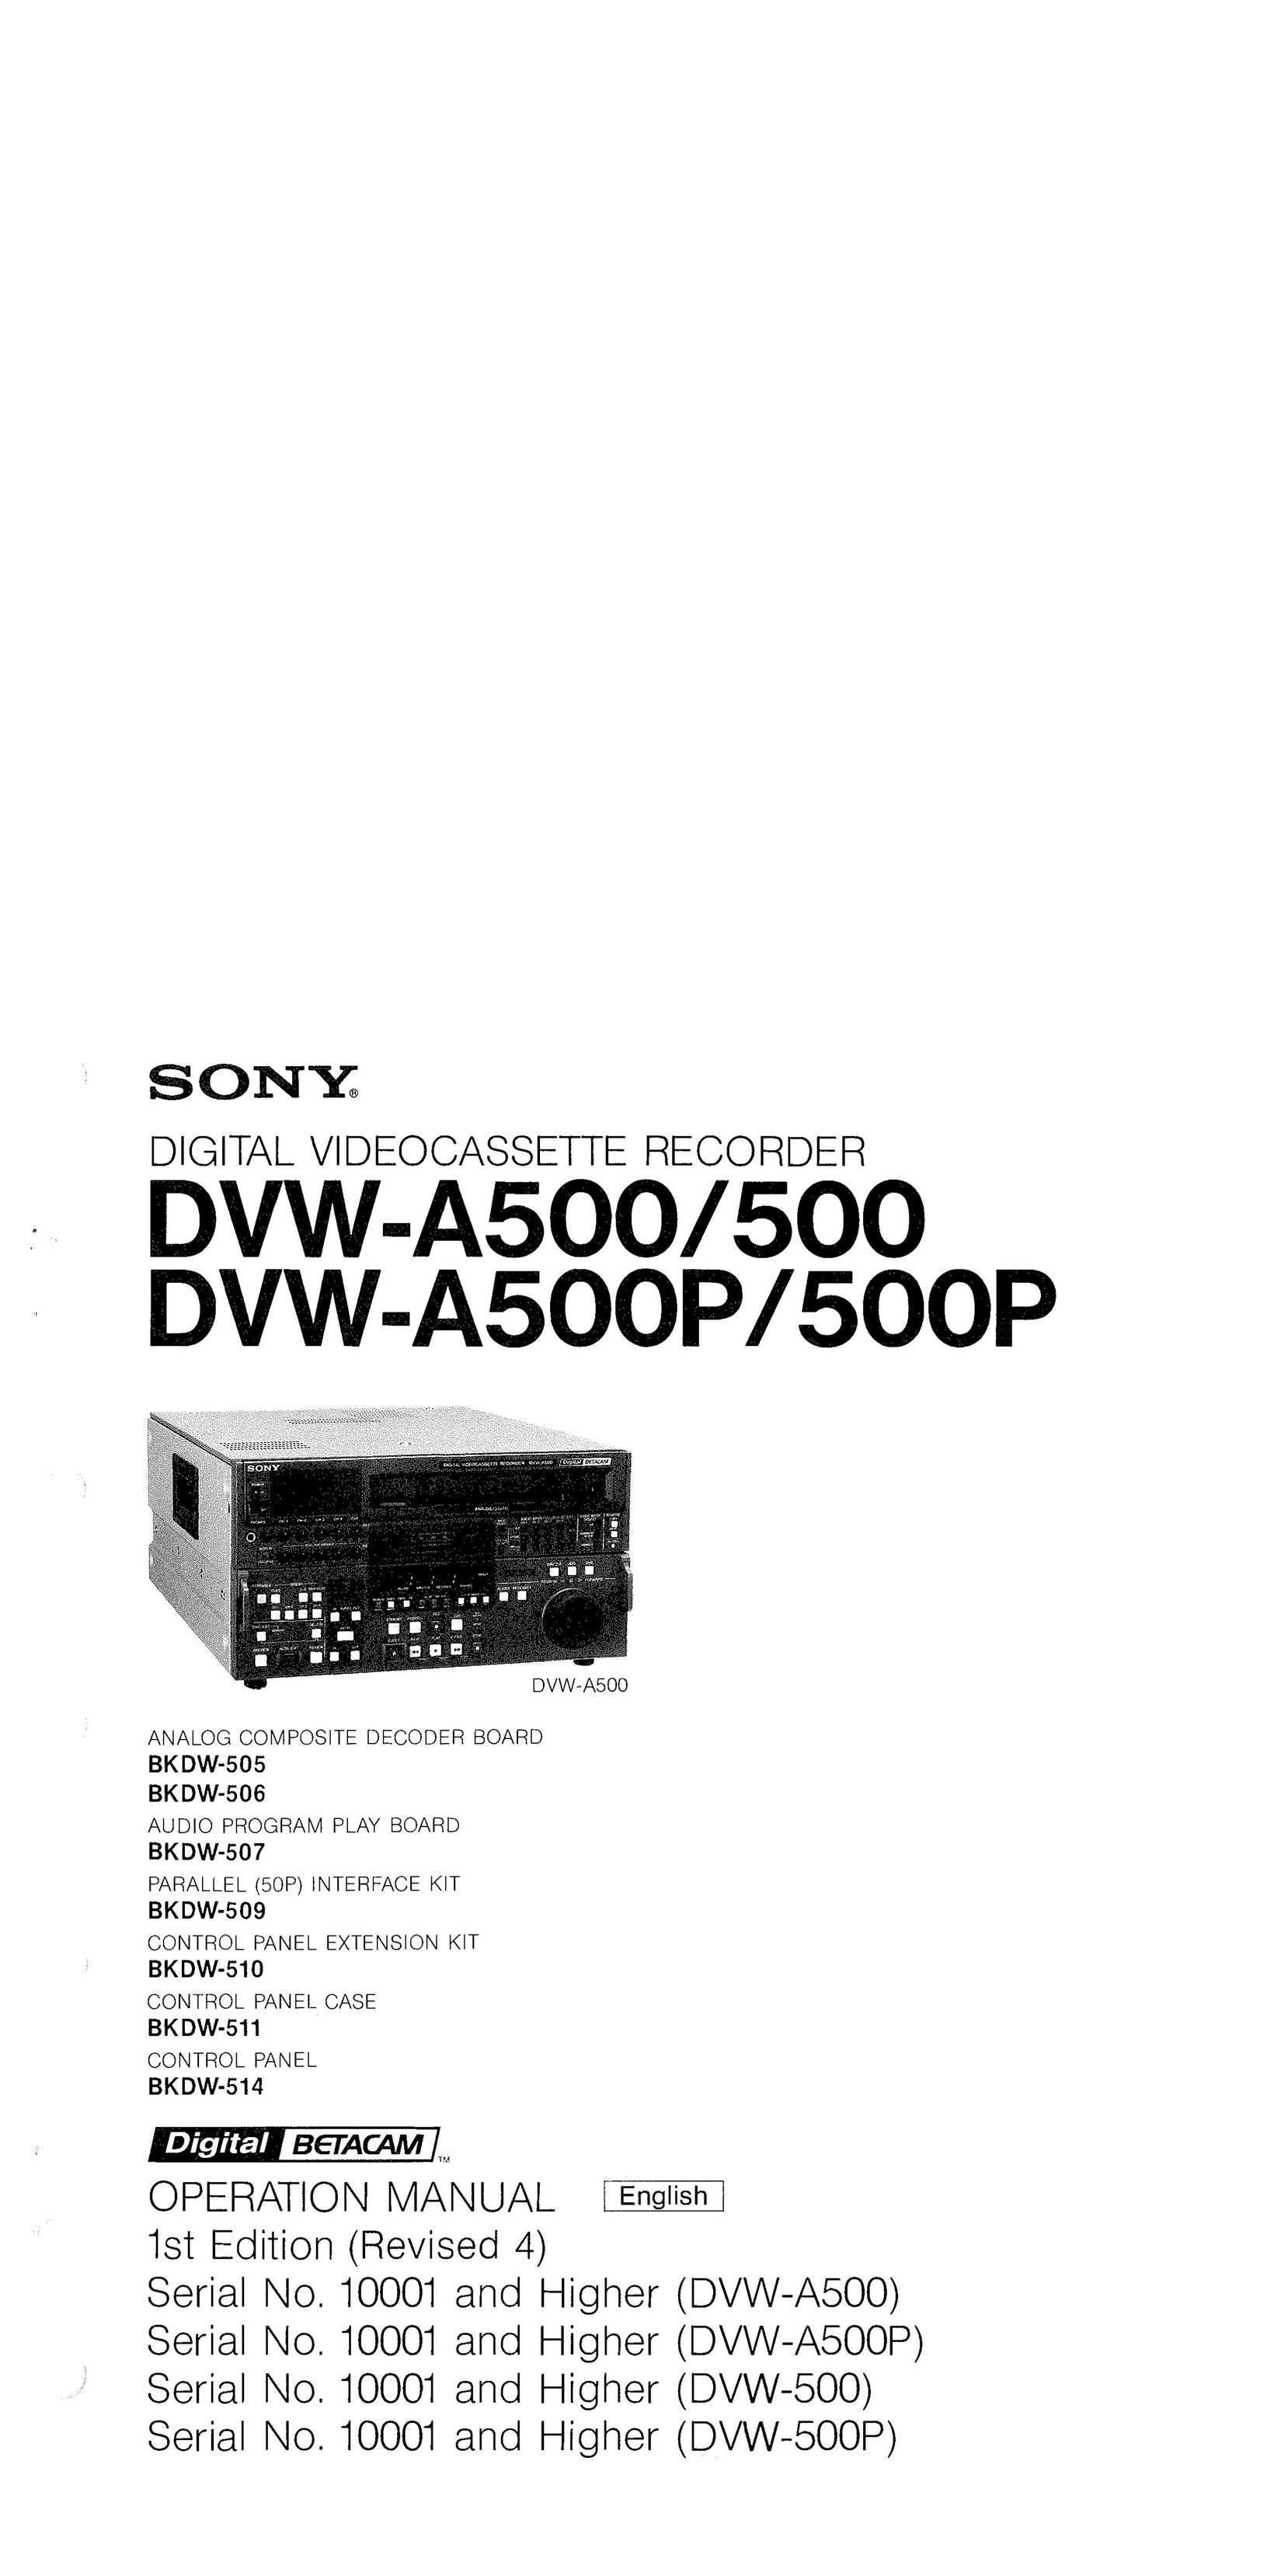 Sony DVW-A500 VCR User Manual